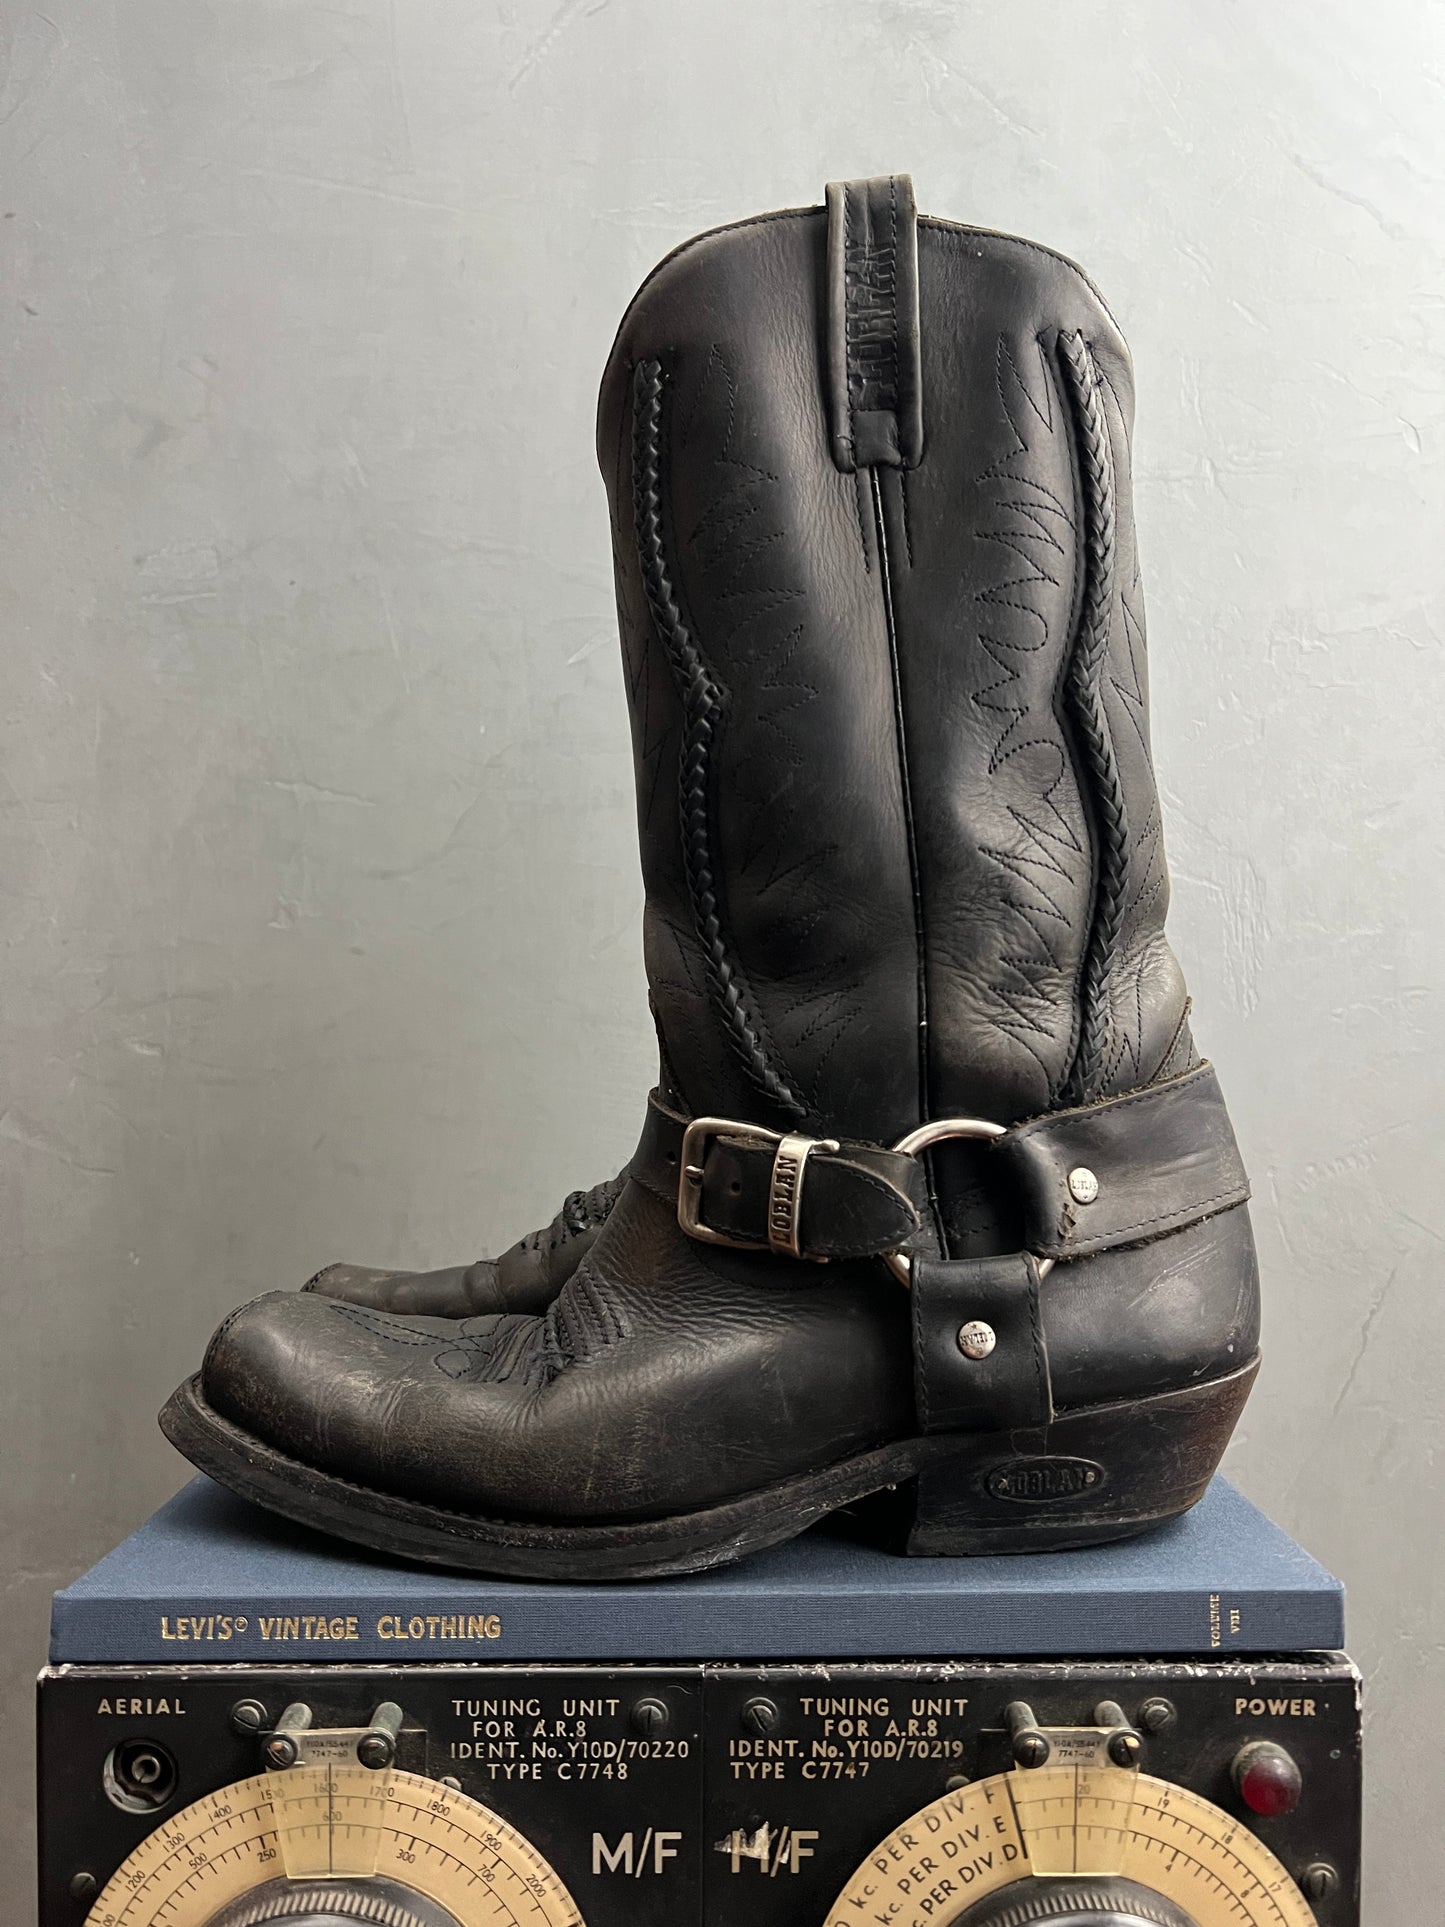 Loblan Motorcycle Boots [10]